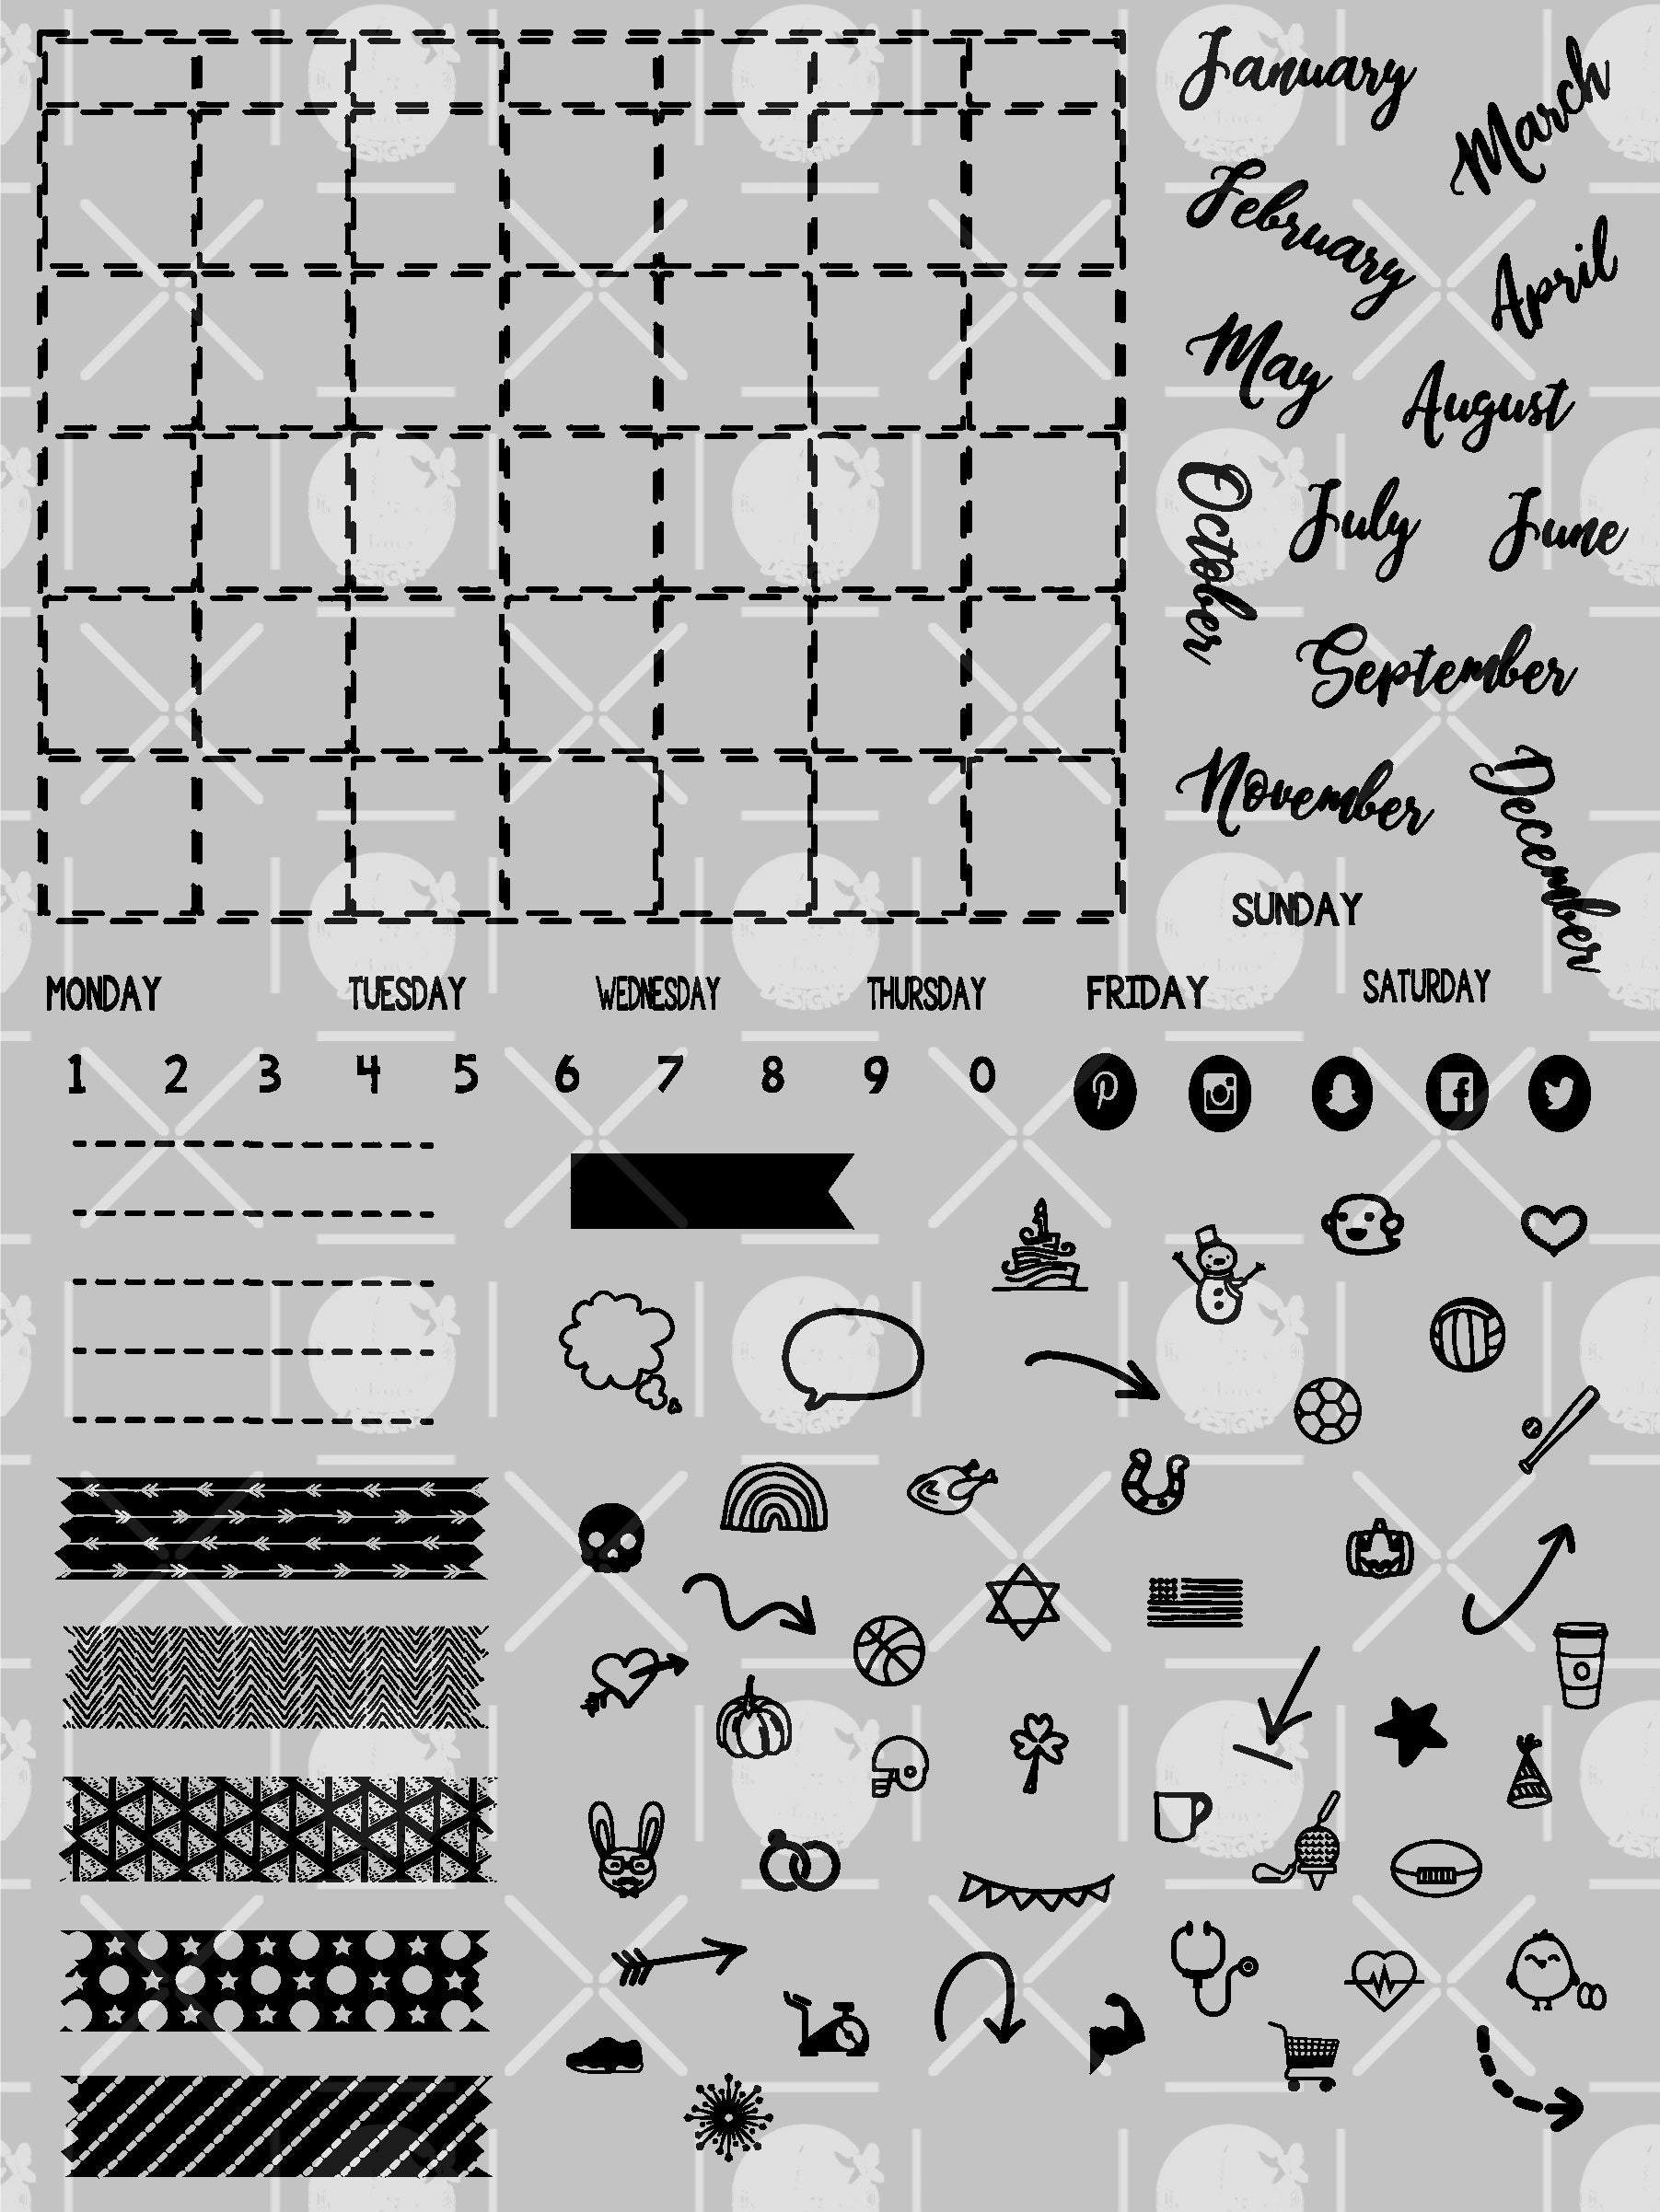 Planner Stamps